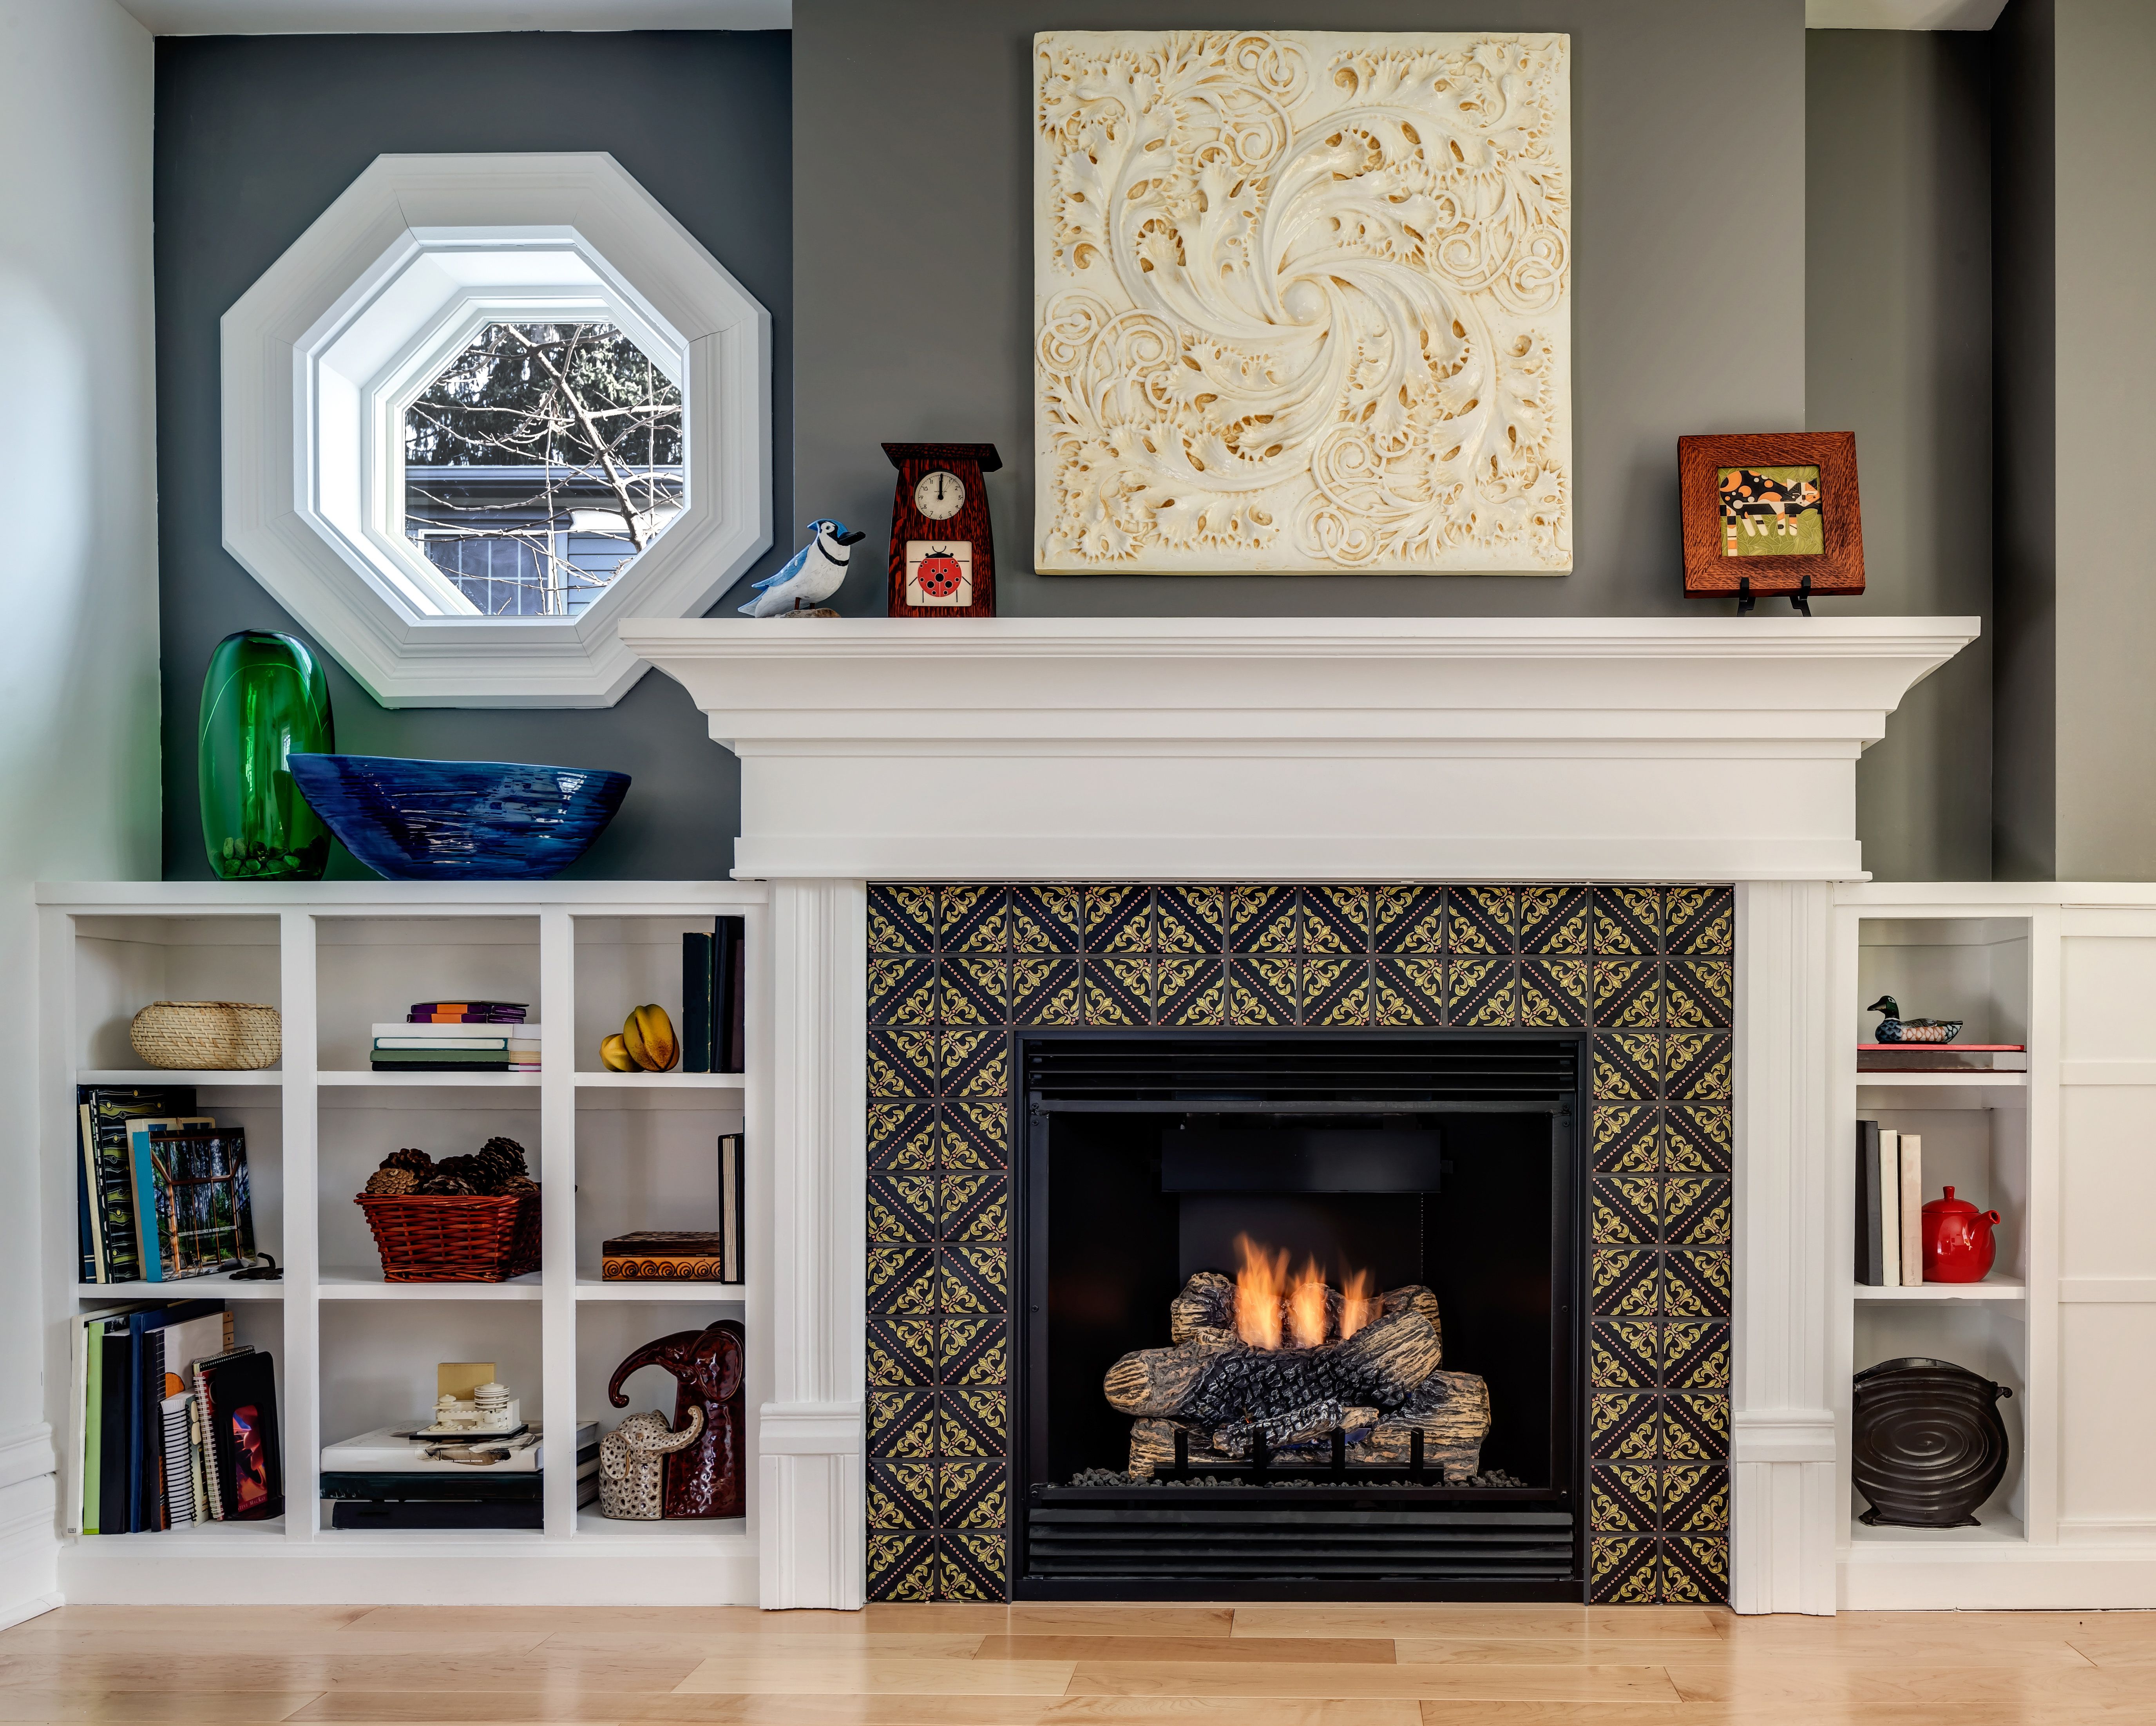 Fireplace Mantel Shelf Lowes Inspirational This Small but Stylish Fireplace Features Our Lisbon Tile